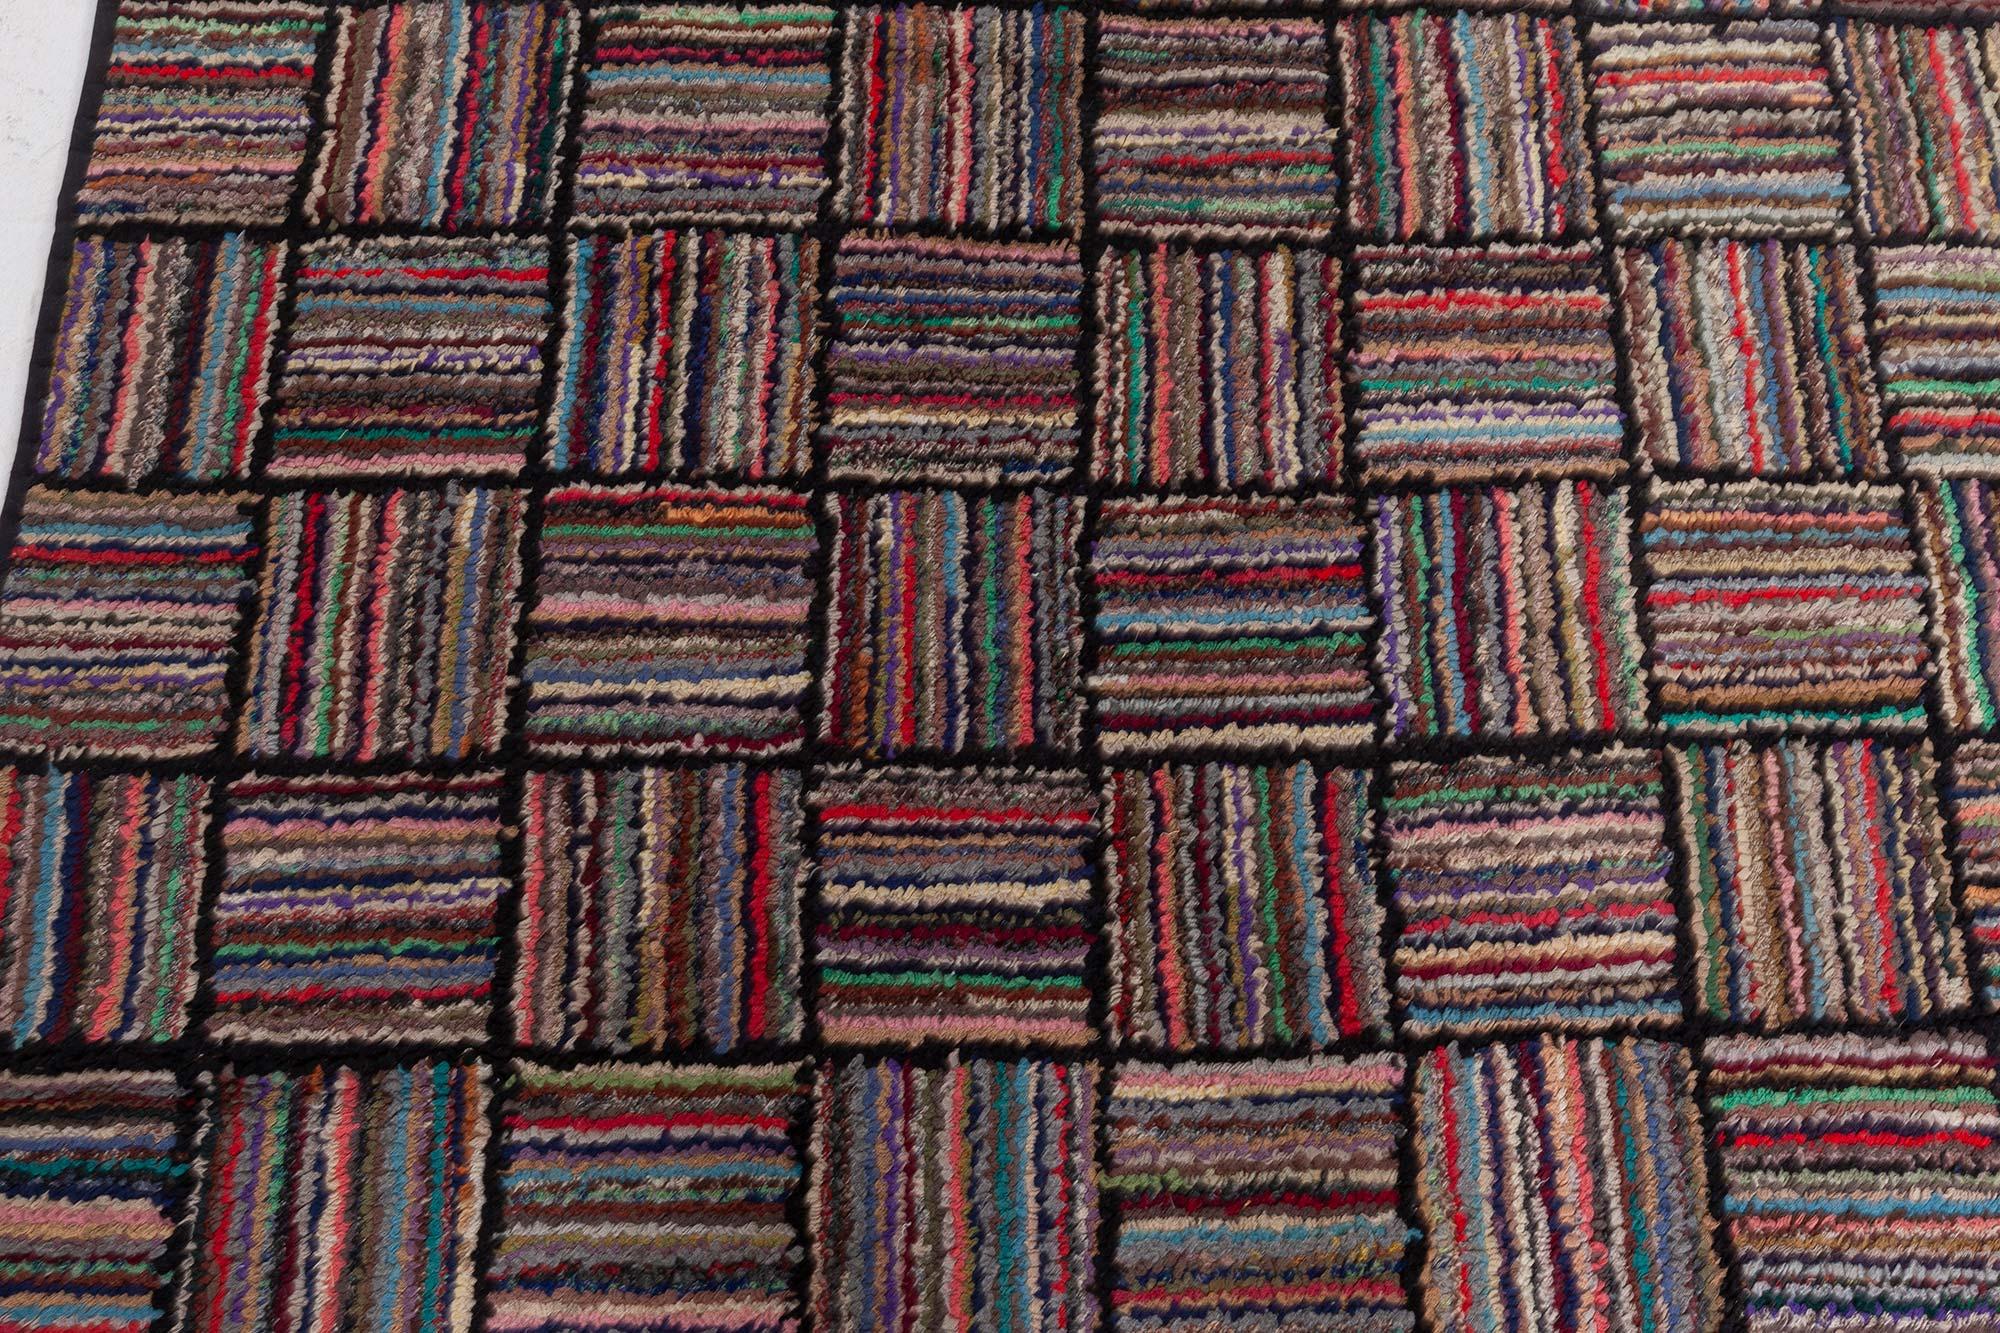 Mid-20th century Striped American Hooked Tile Rug
Size: 8'10